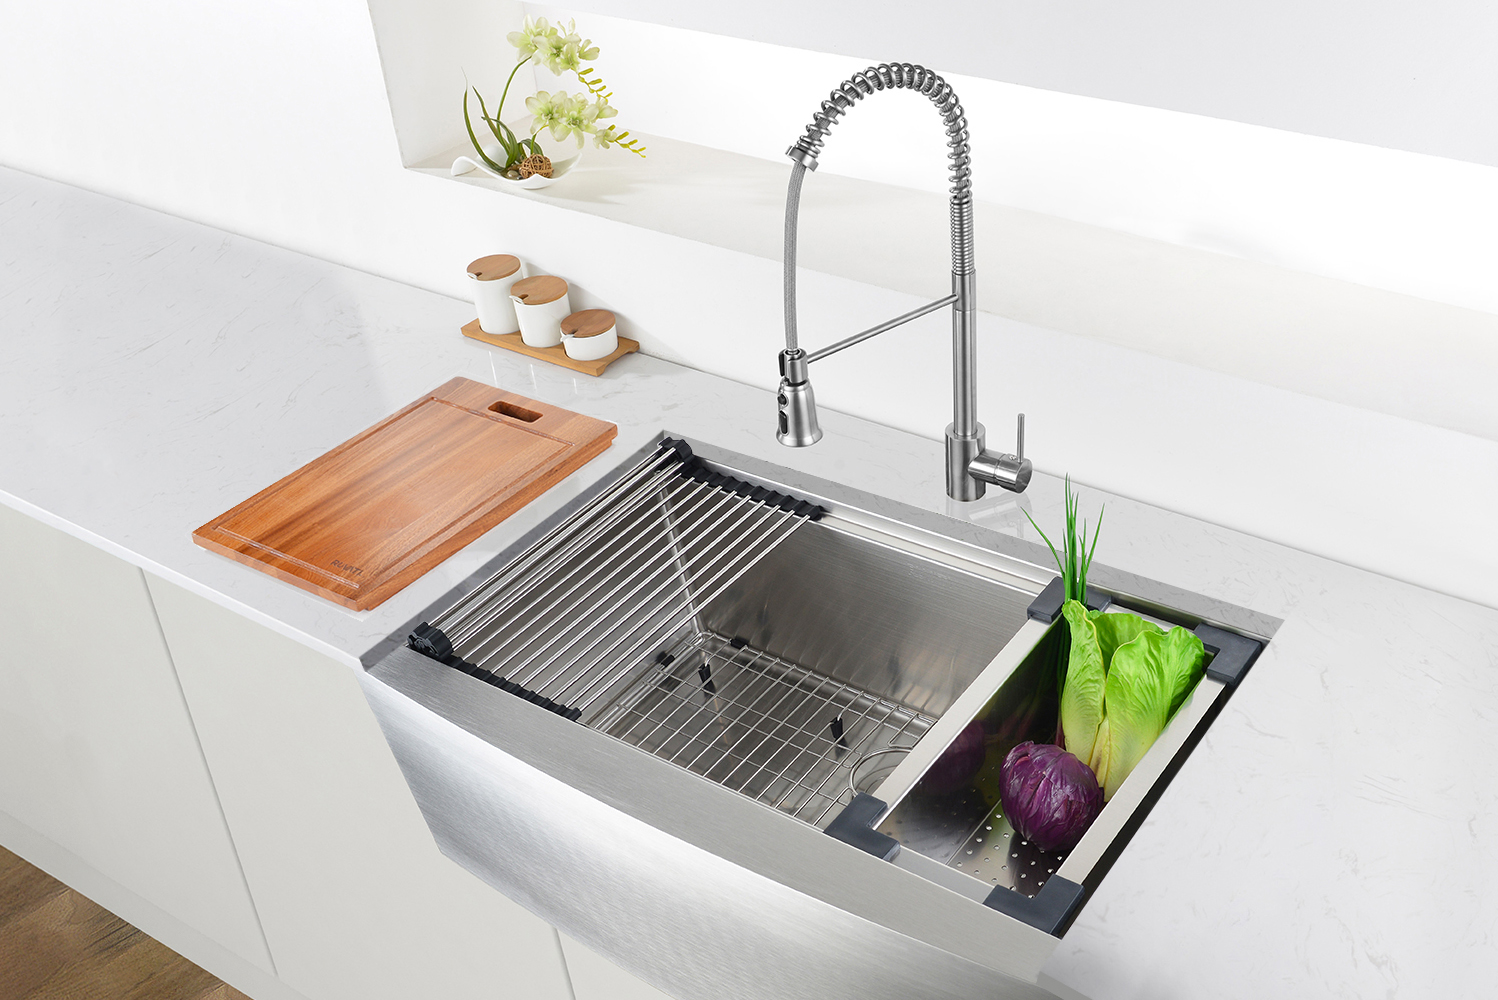 Ruvati launched Verona a collection of workstation sinks 